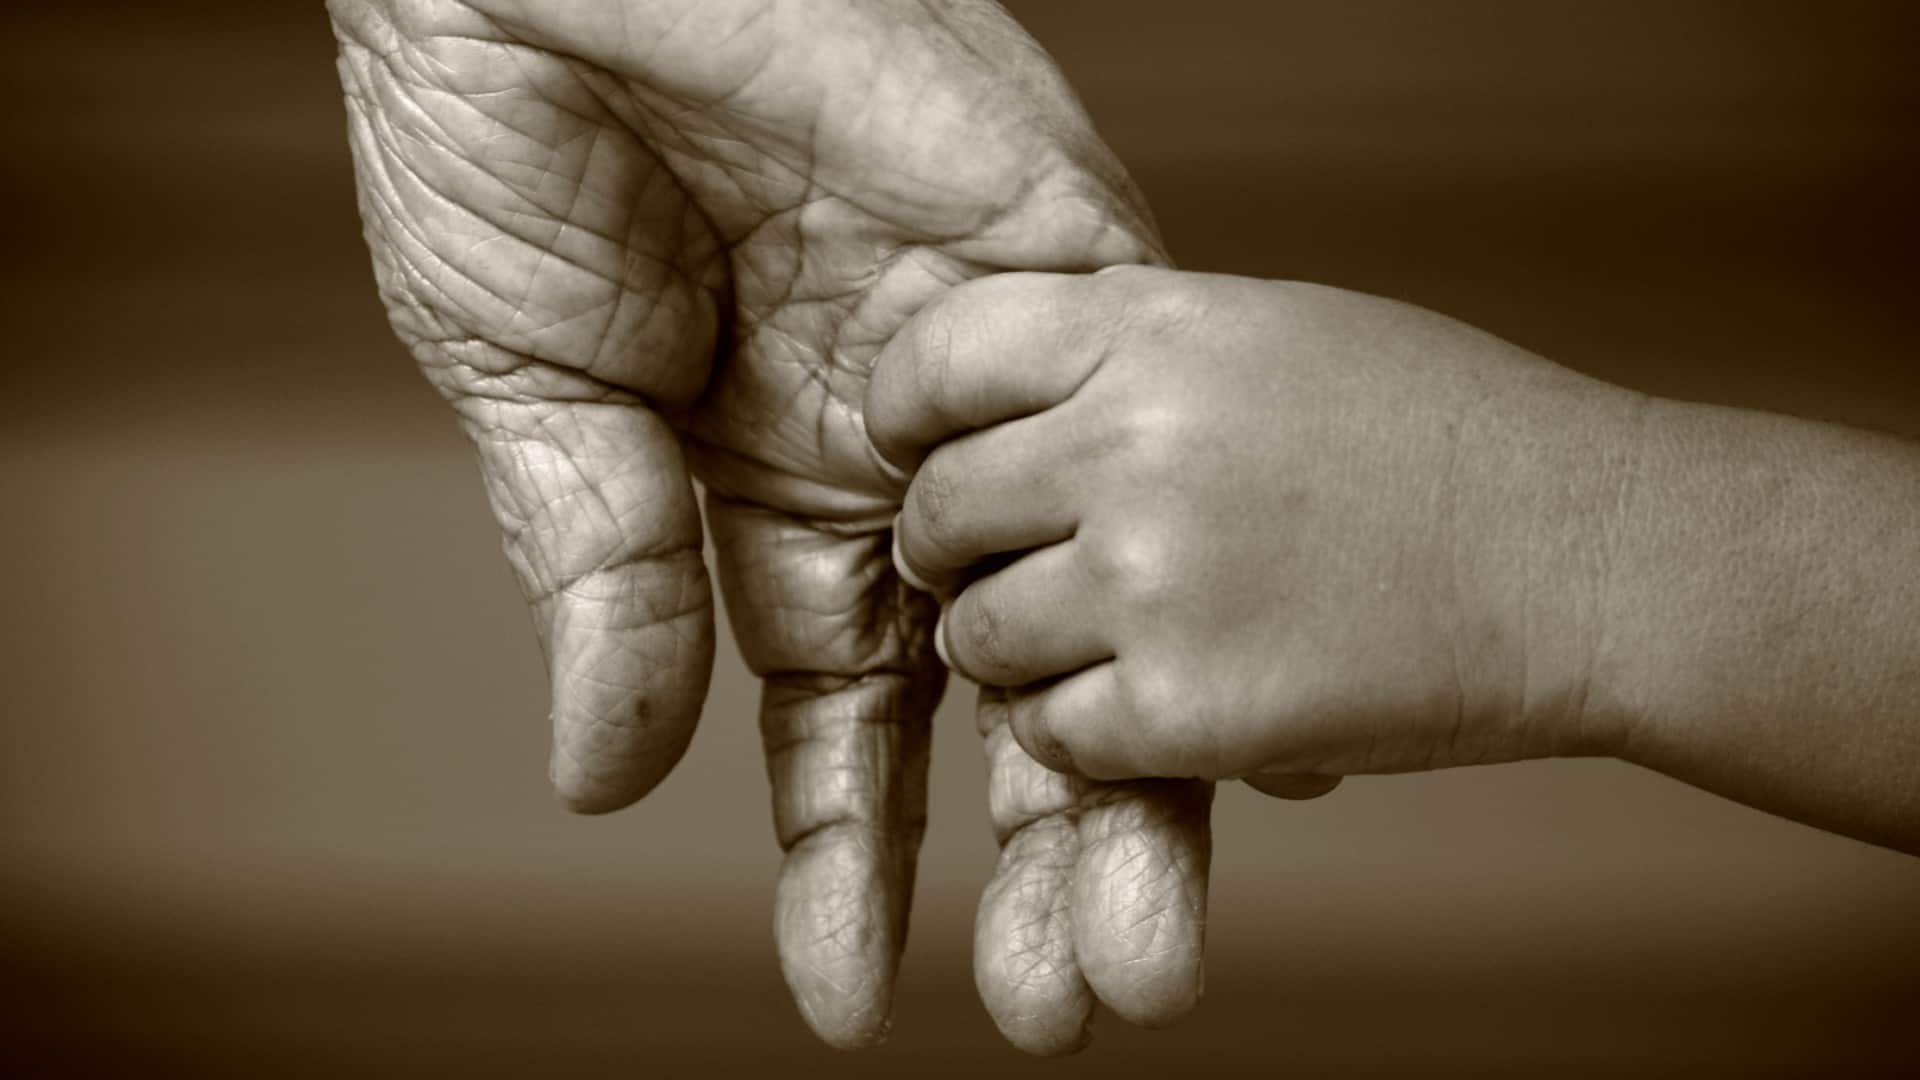 Black and white close-up of a child's hand holding an elderly person's hand